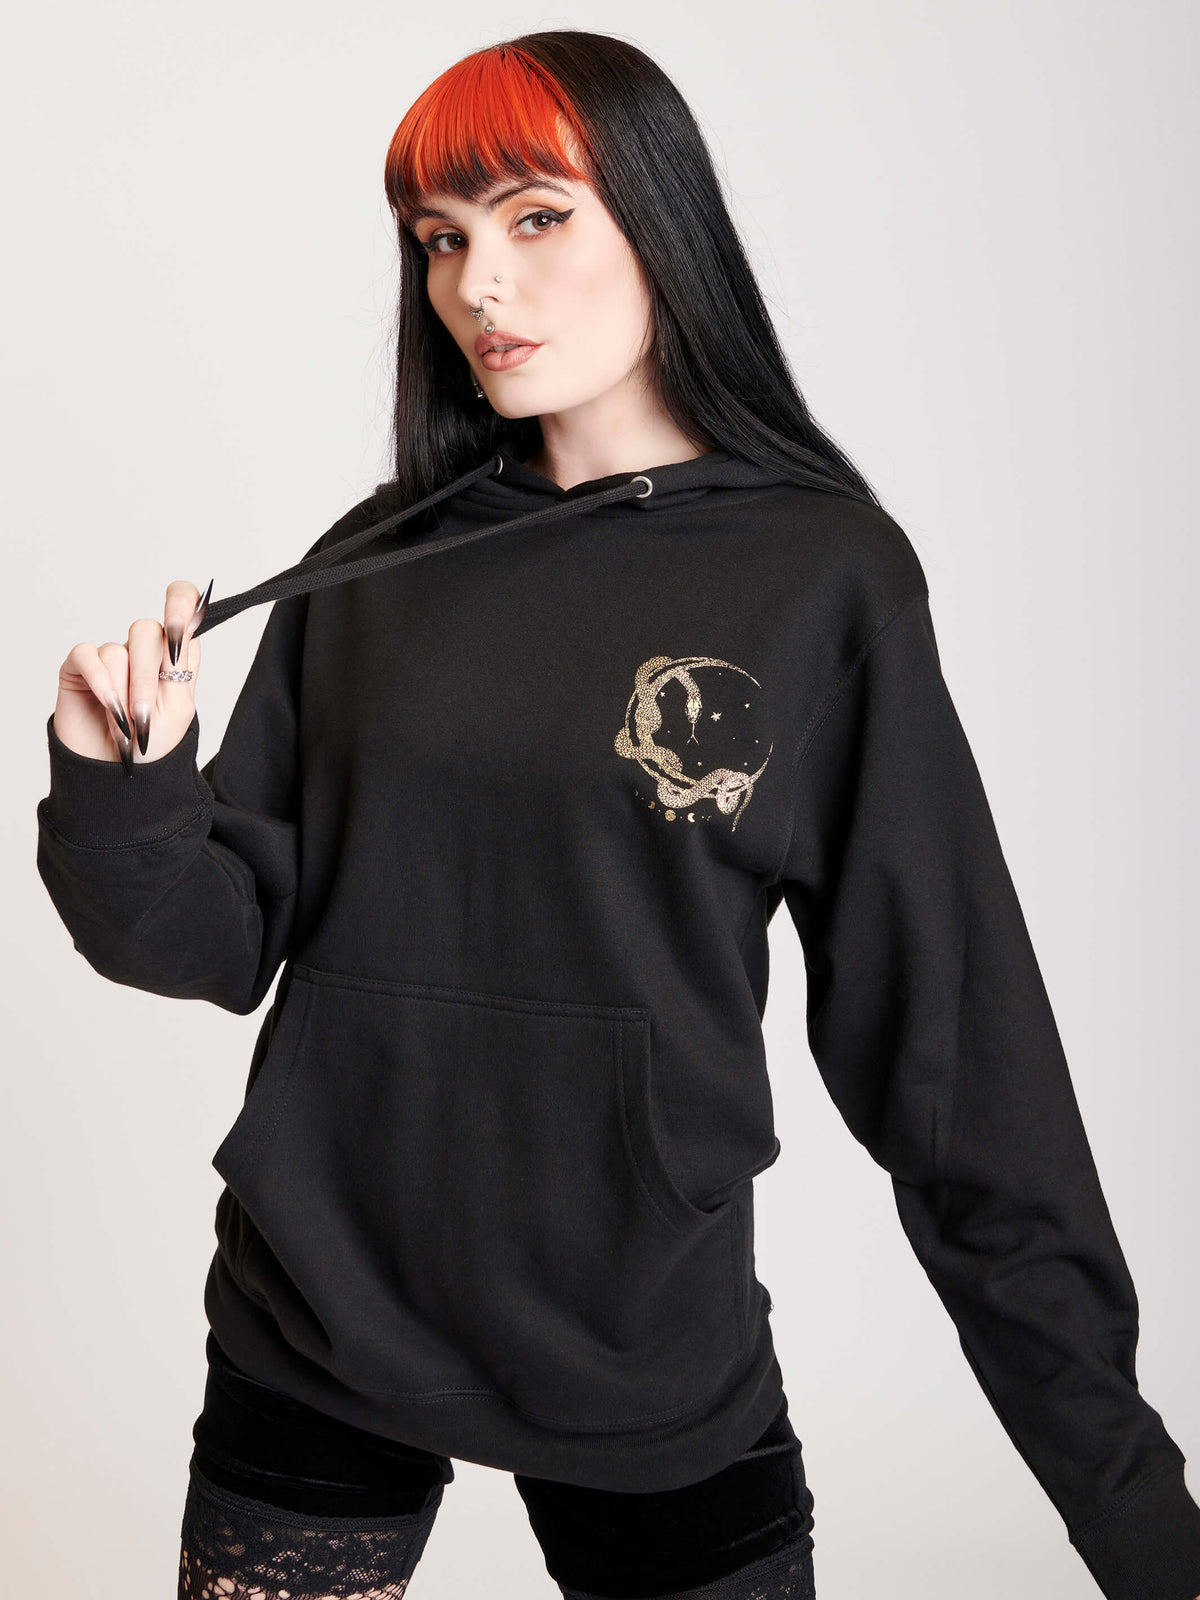 Black hoodie with gold moon tarot card graphic